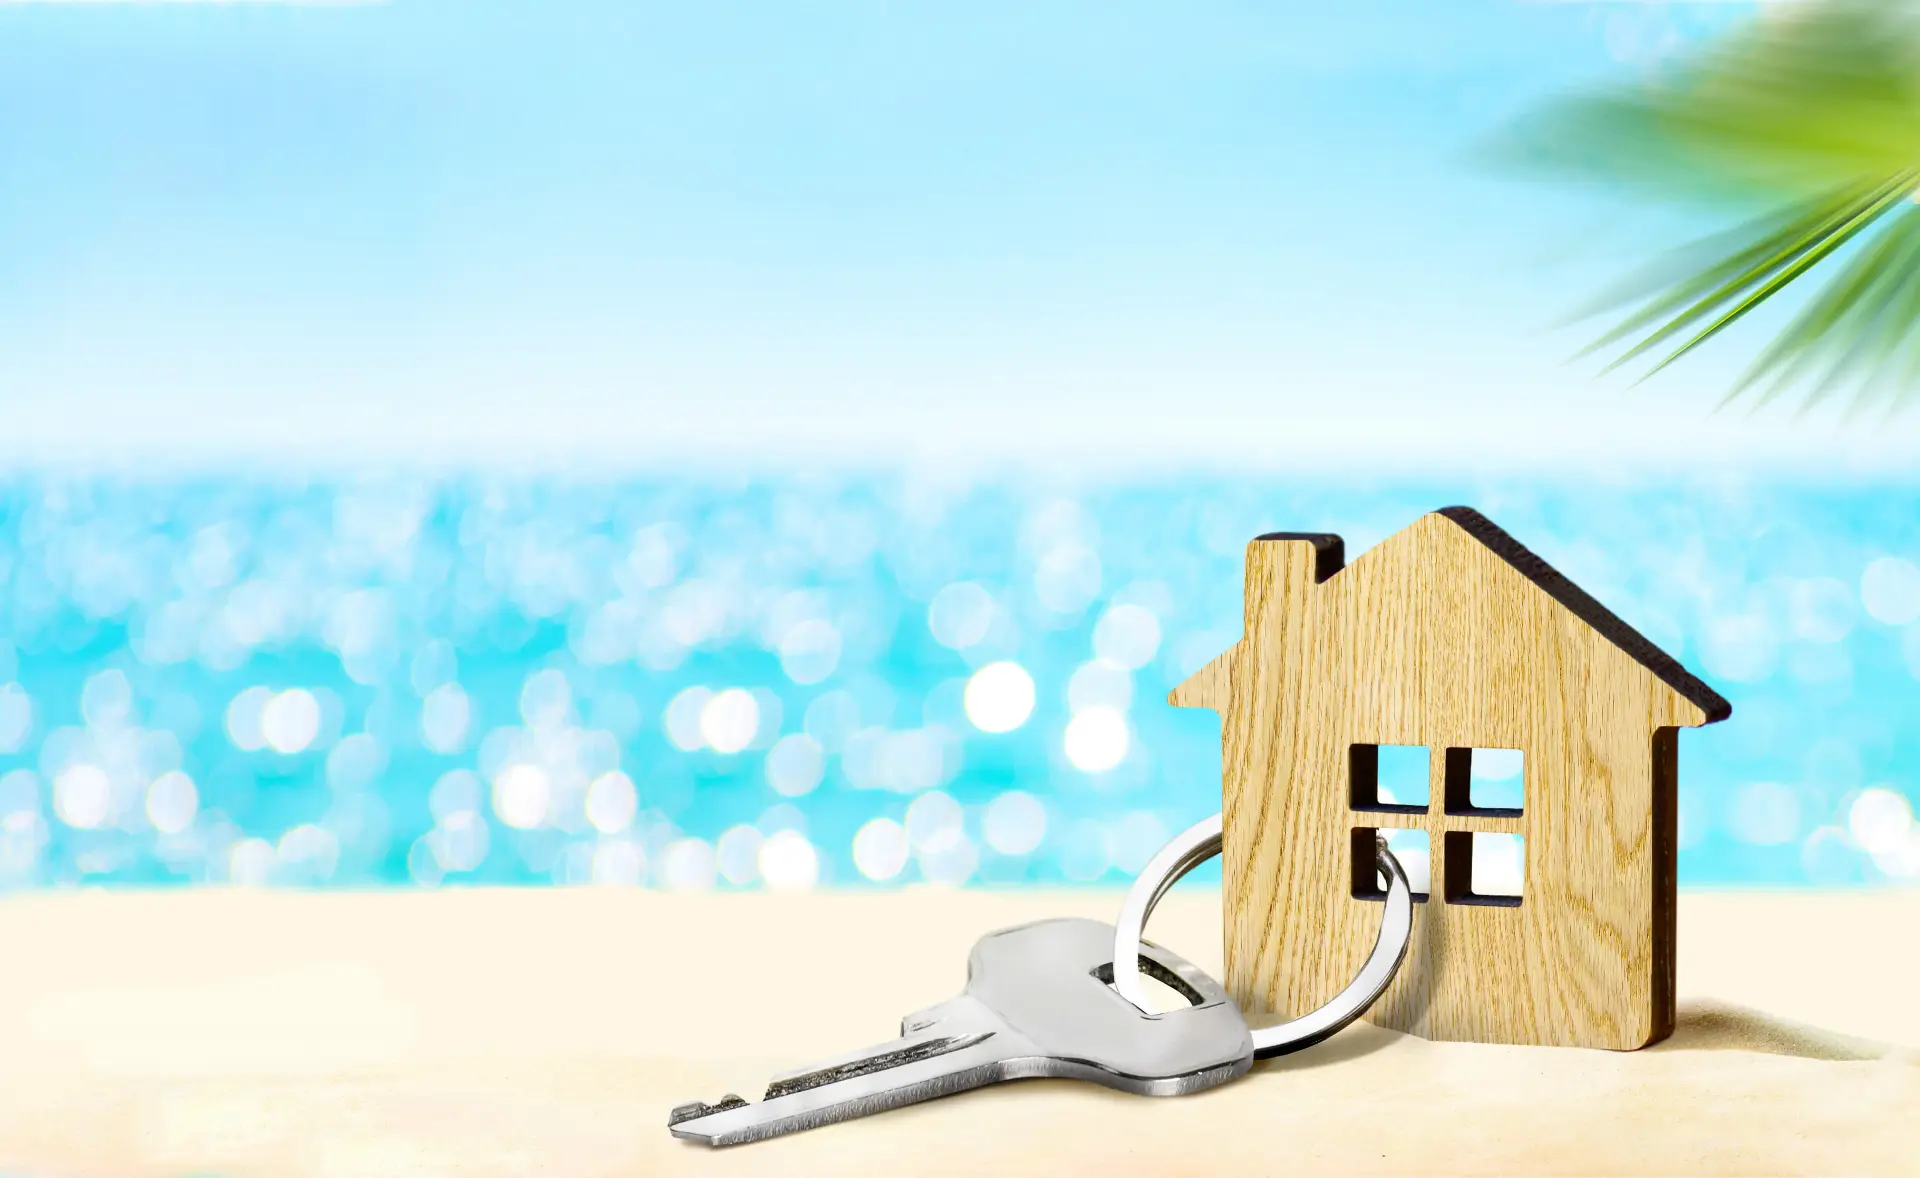 A flat wooden house keychain with a silver key attached by a key ring sits on a sandy beach with sparkling blue water in the background. There is a leafy palm in the top right hand corner.